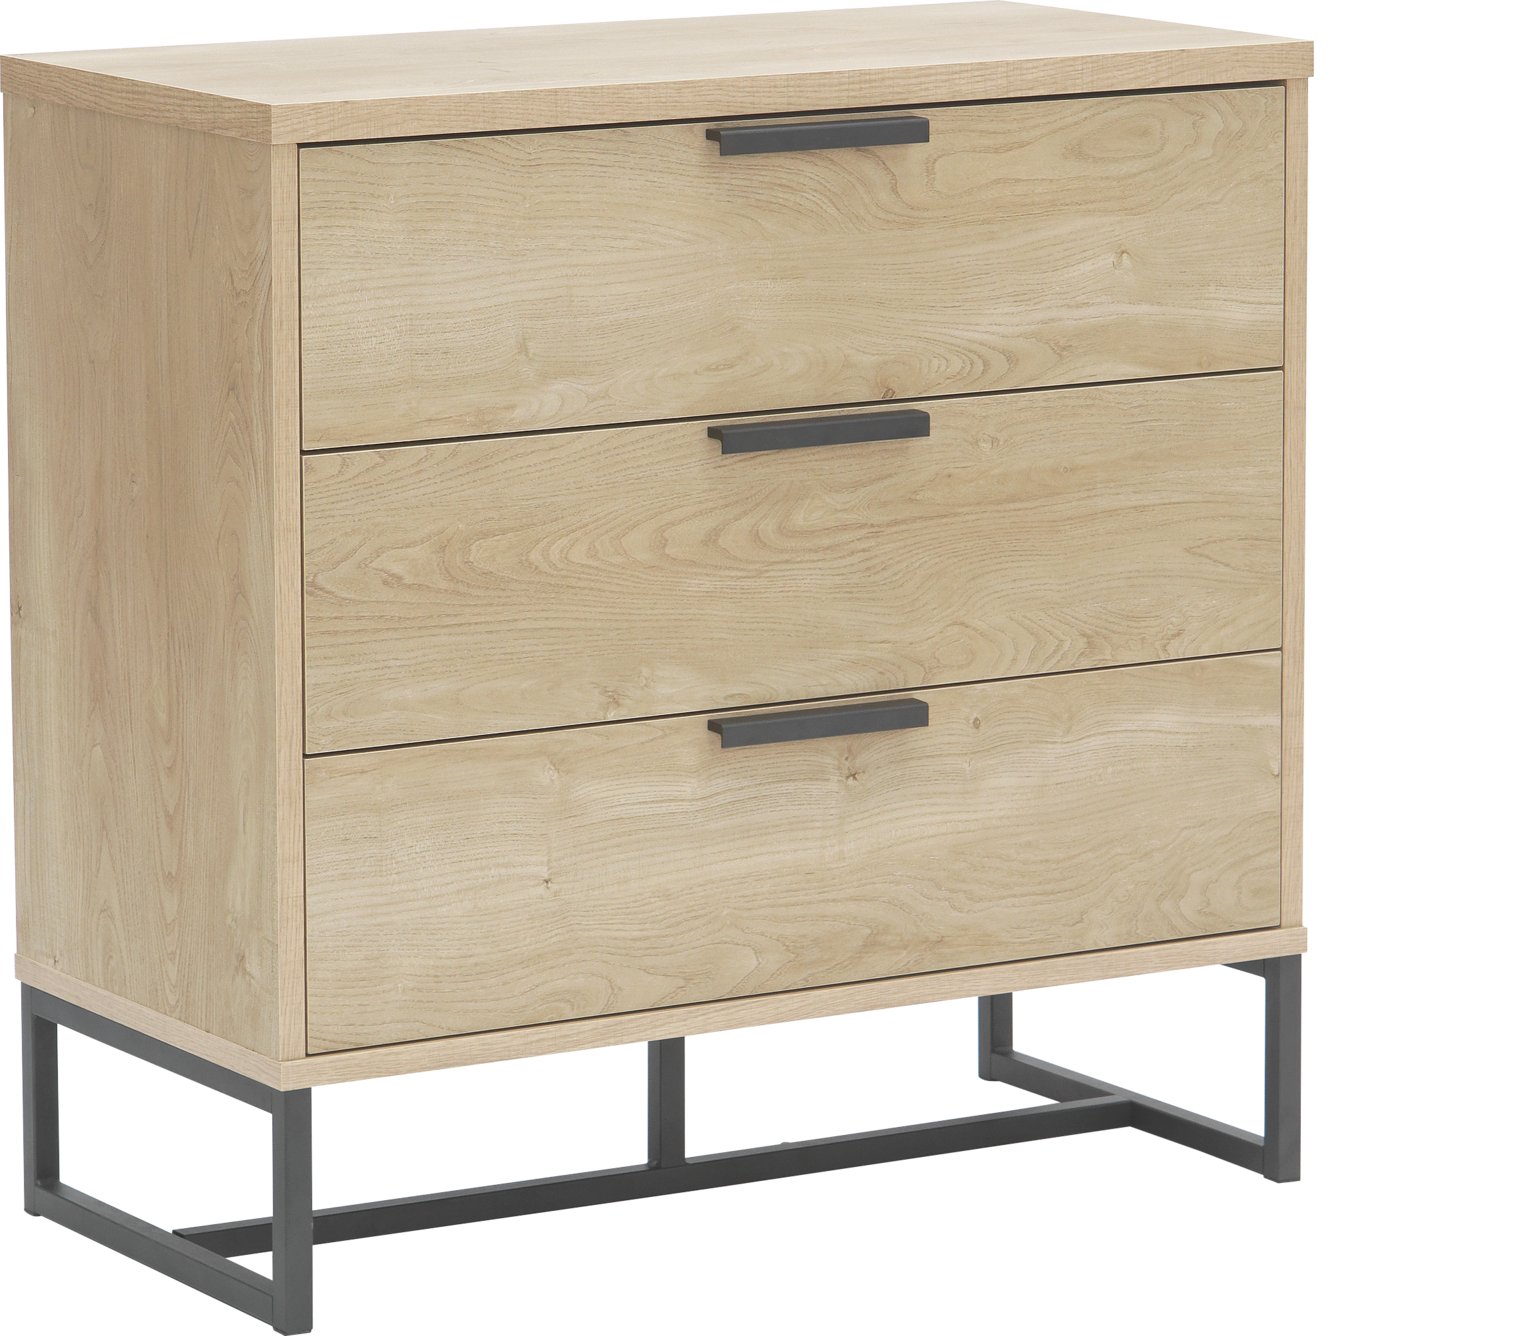 Argos Home Nomad 3 Drawer Chest of Drawers -Light Oak Effect